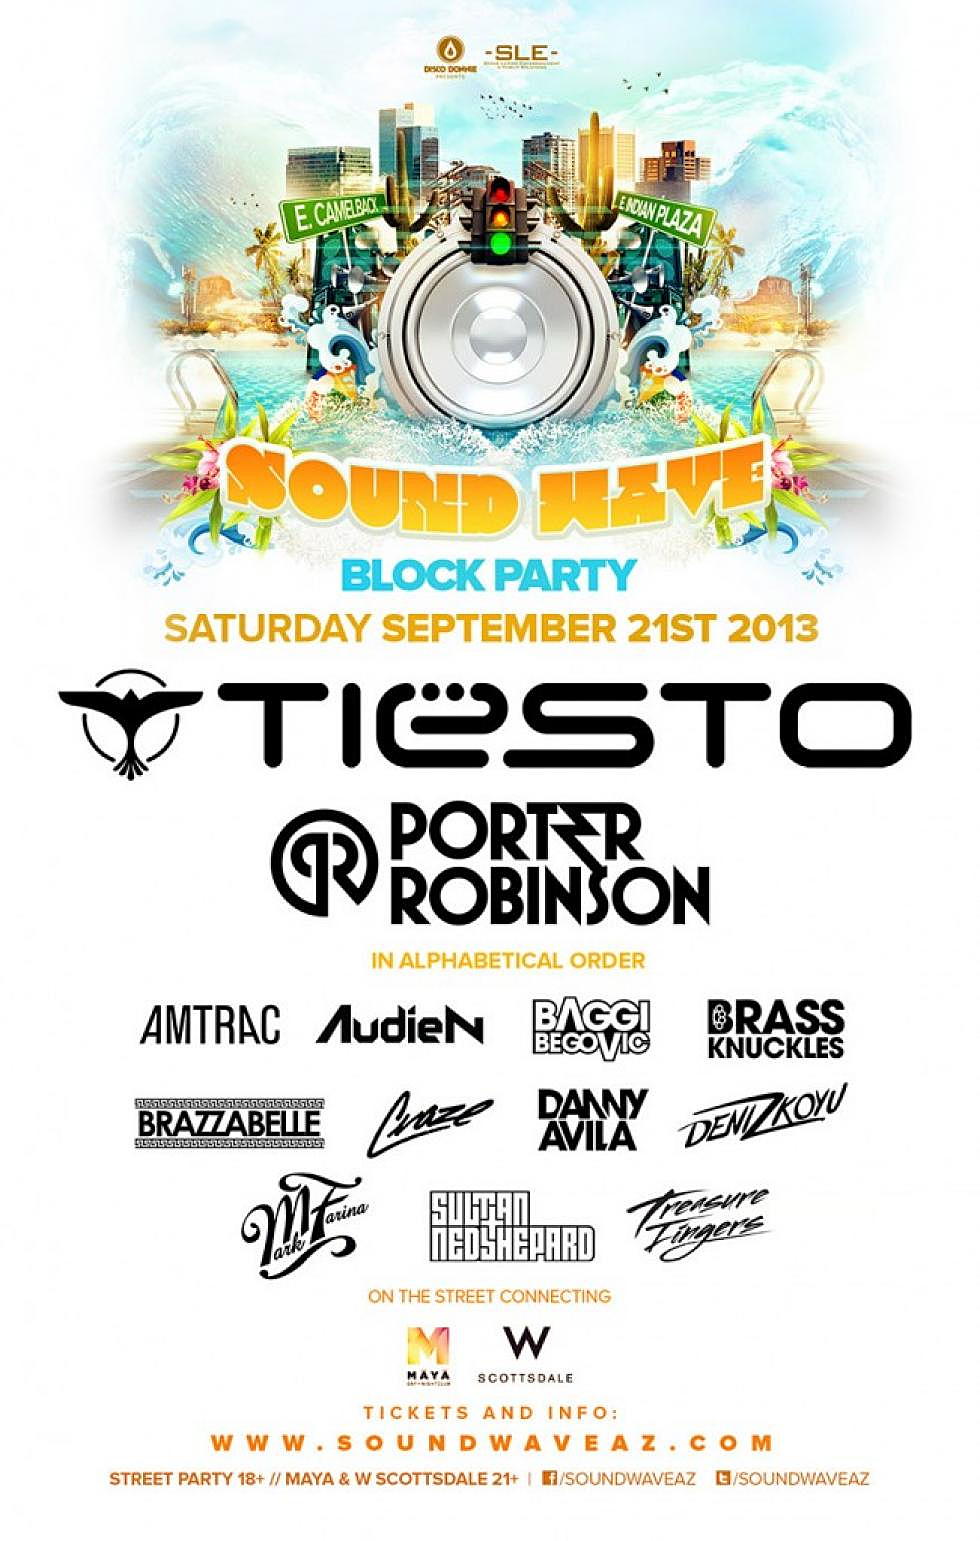 Contest: Win 2 tickets to Sound Wave Block Party ft. Tiesto, Porter Robinson &#038; more, Scottsdale, AZ 9/21